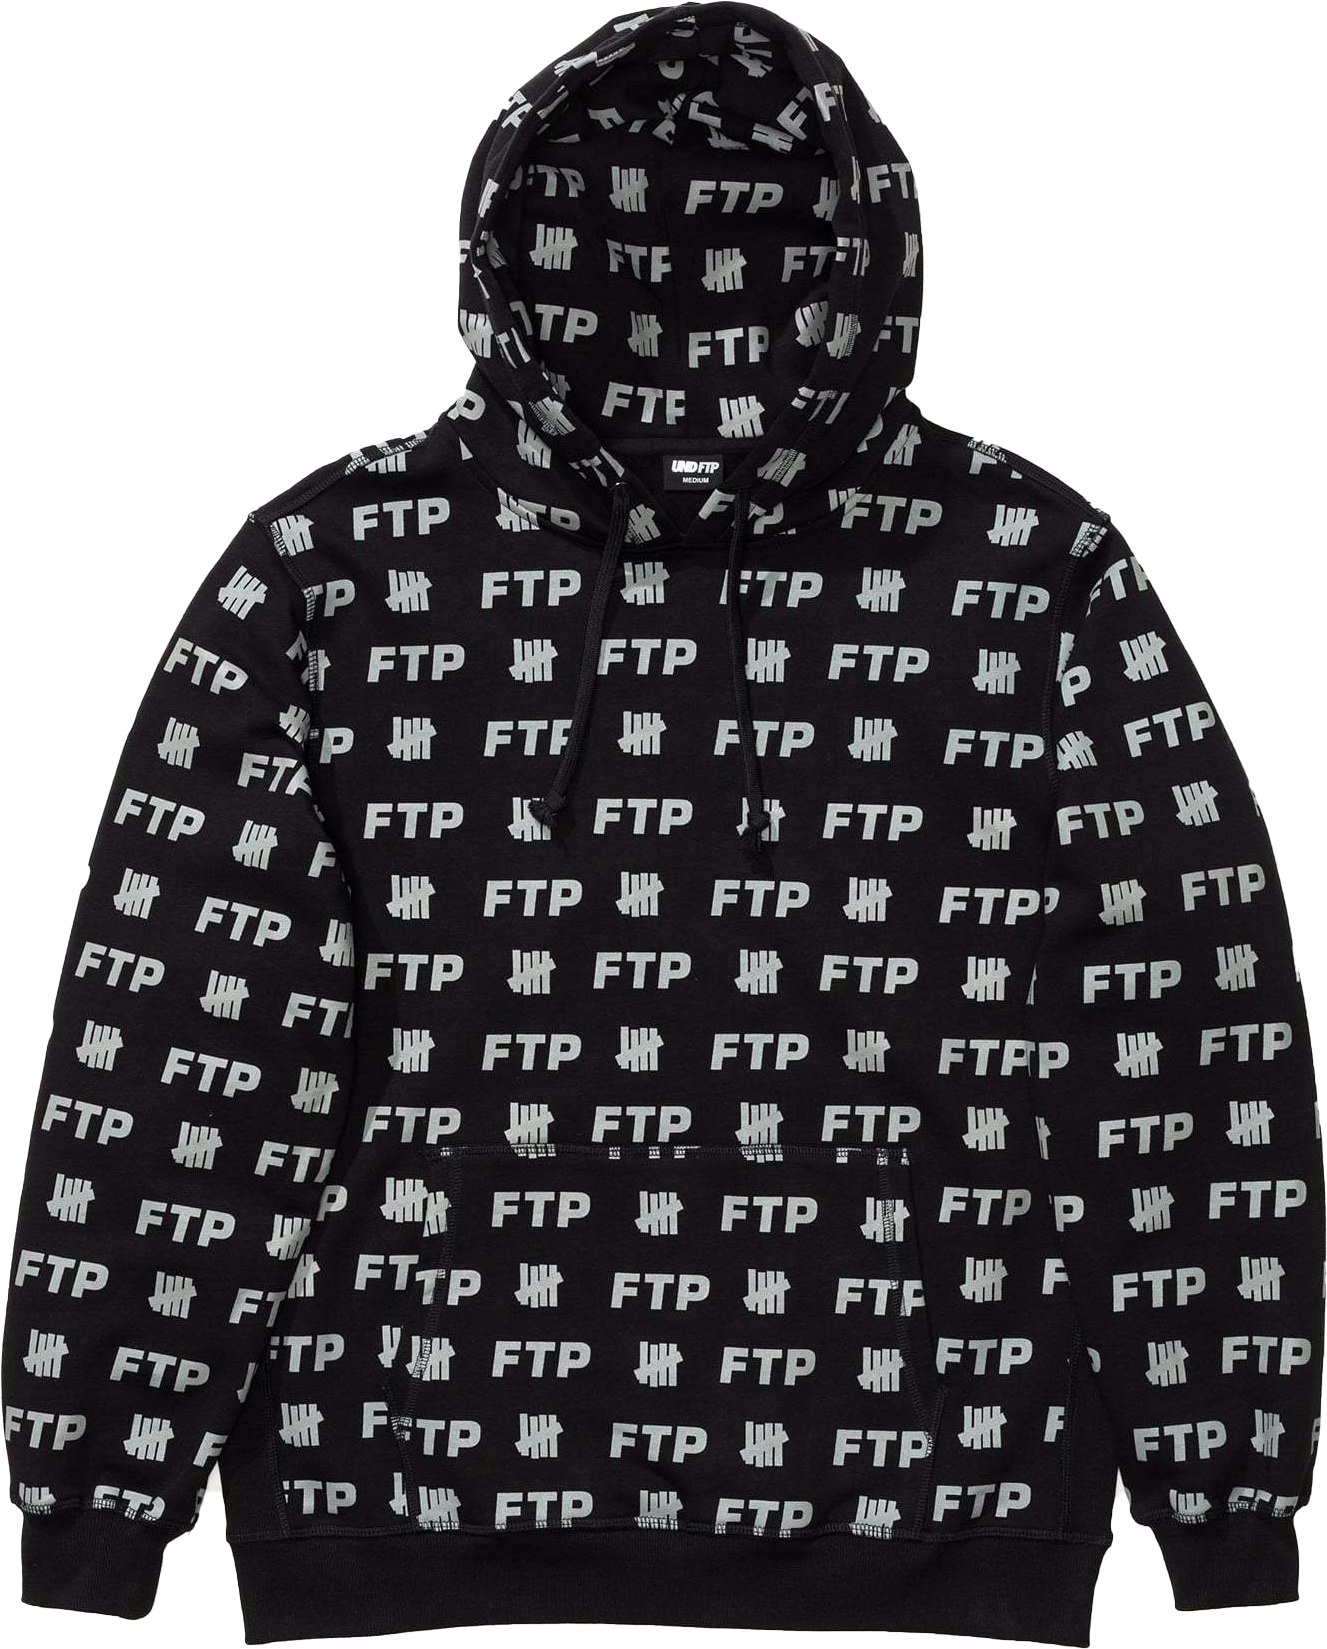 FTP x UNDEFEATED All Over Hoodie Black - Novelship